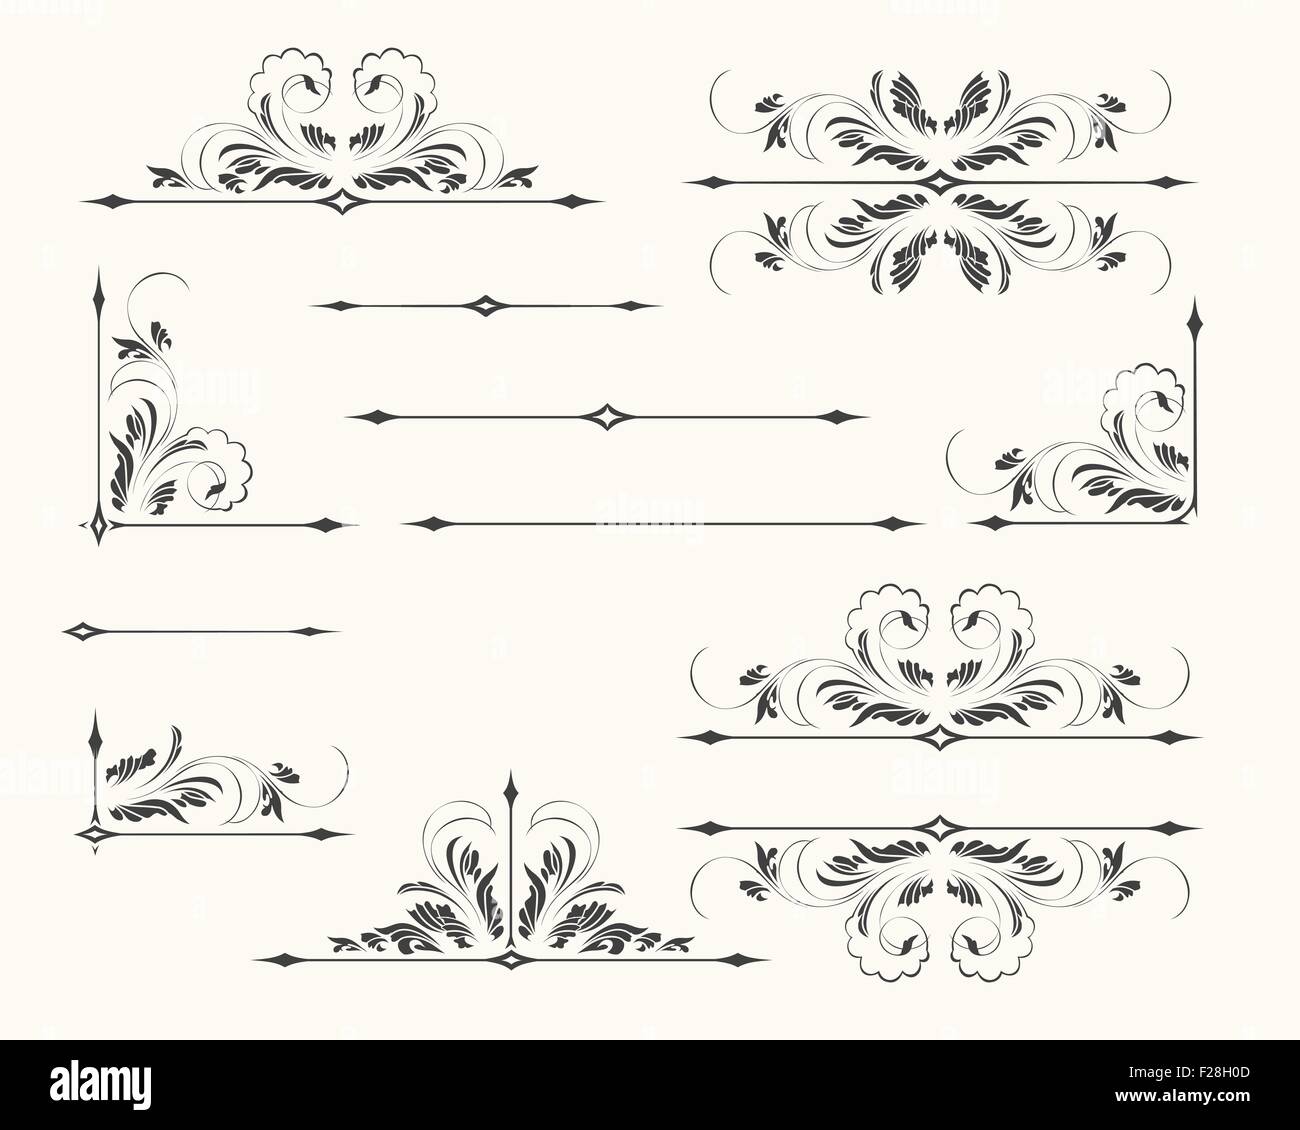 Set of decorative floral elements in vintage style. Dividers Corners and borders. Isolated on monochrome background. Stock Vector